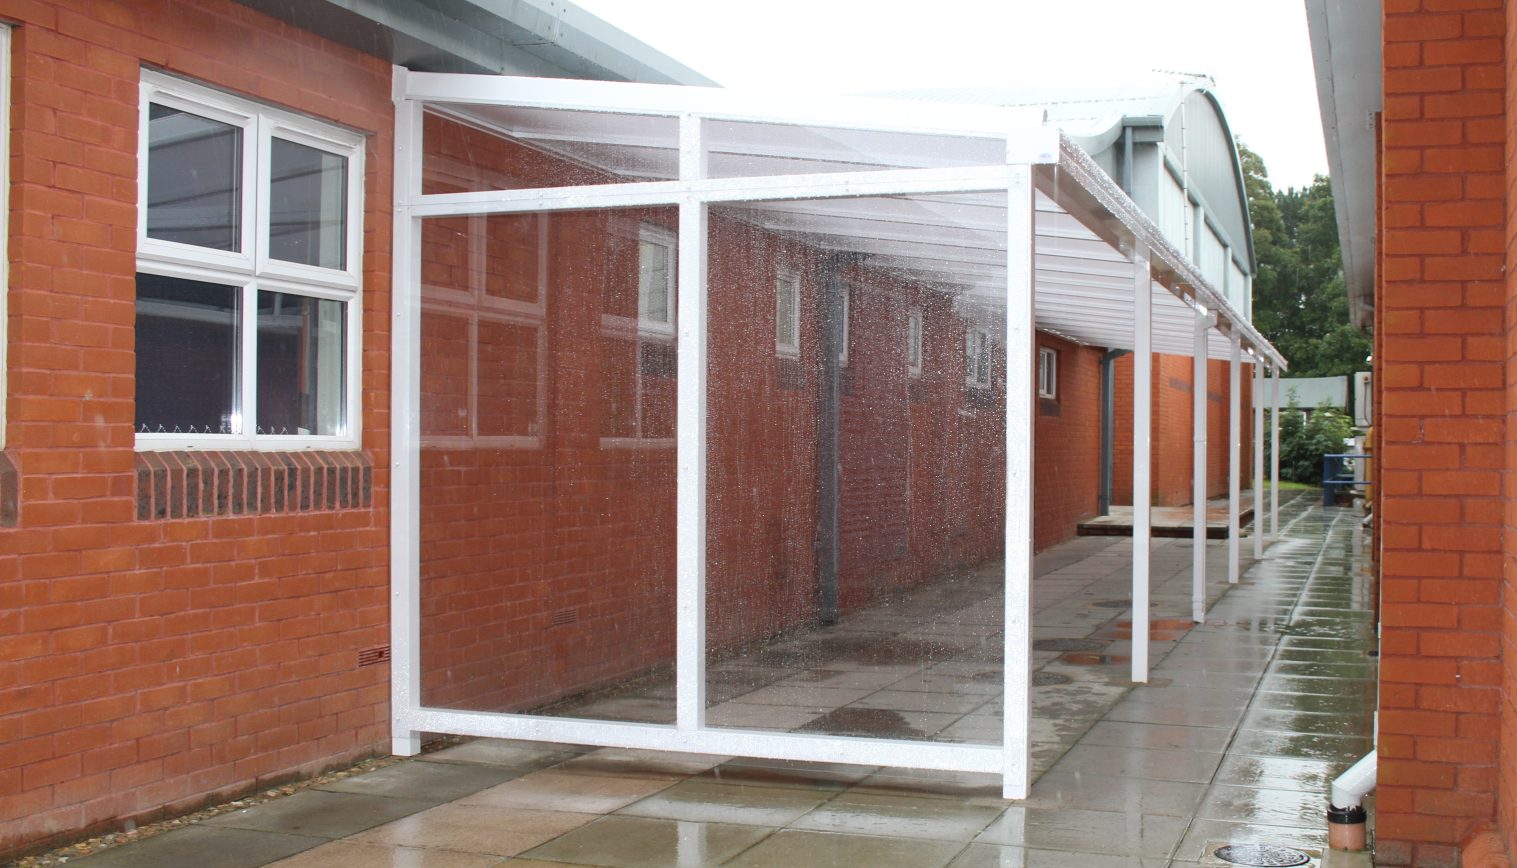 Sutton Valence School – Wall Mounted Canopy